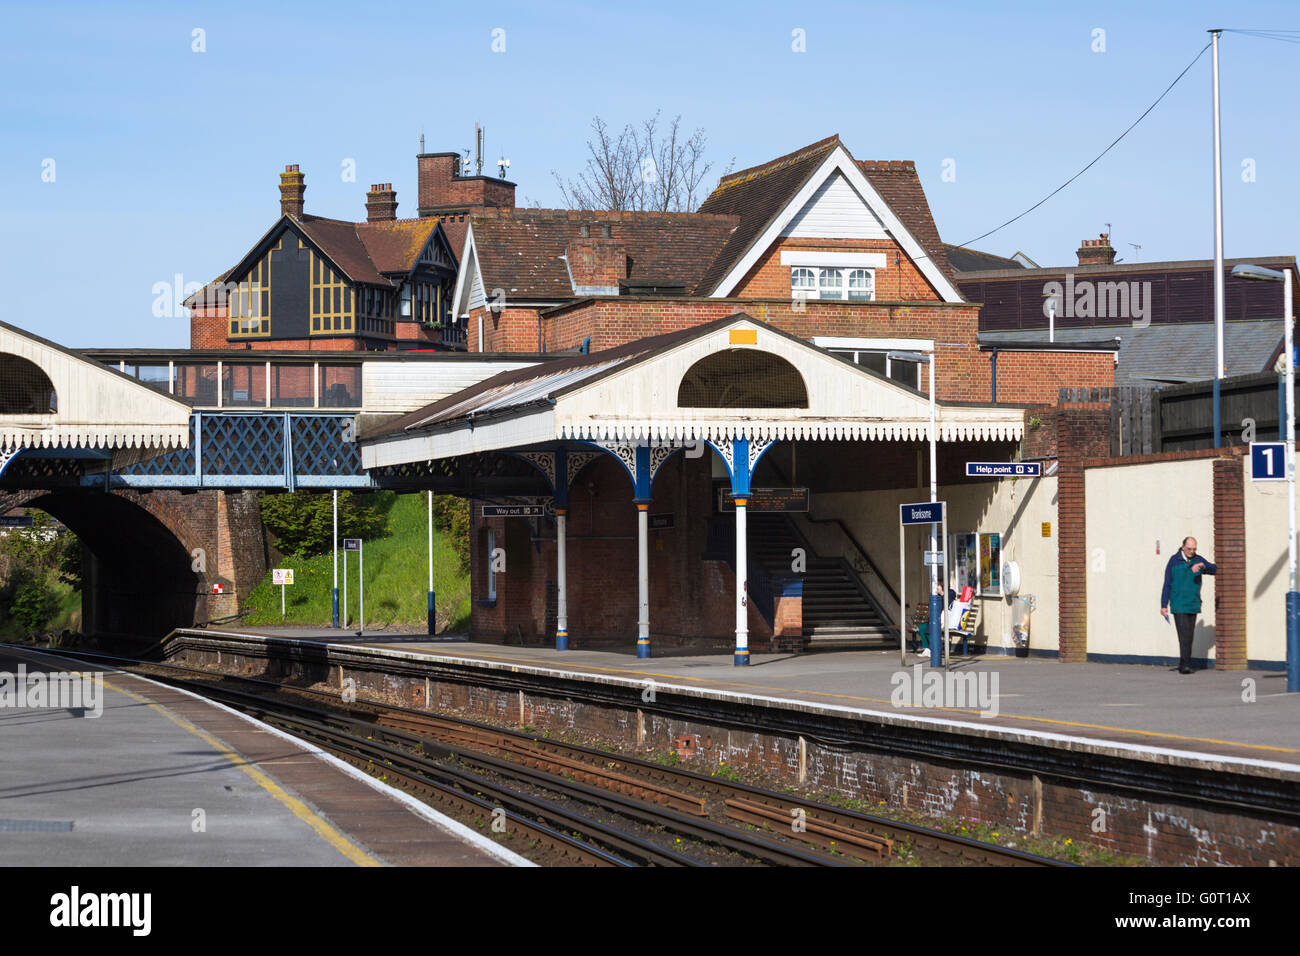 Man standing on platform looking at watch at Branksome train station, Dorset, UK in May Stock Photo